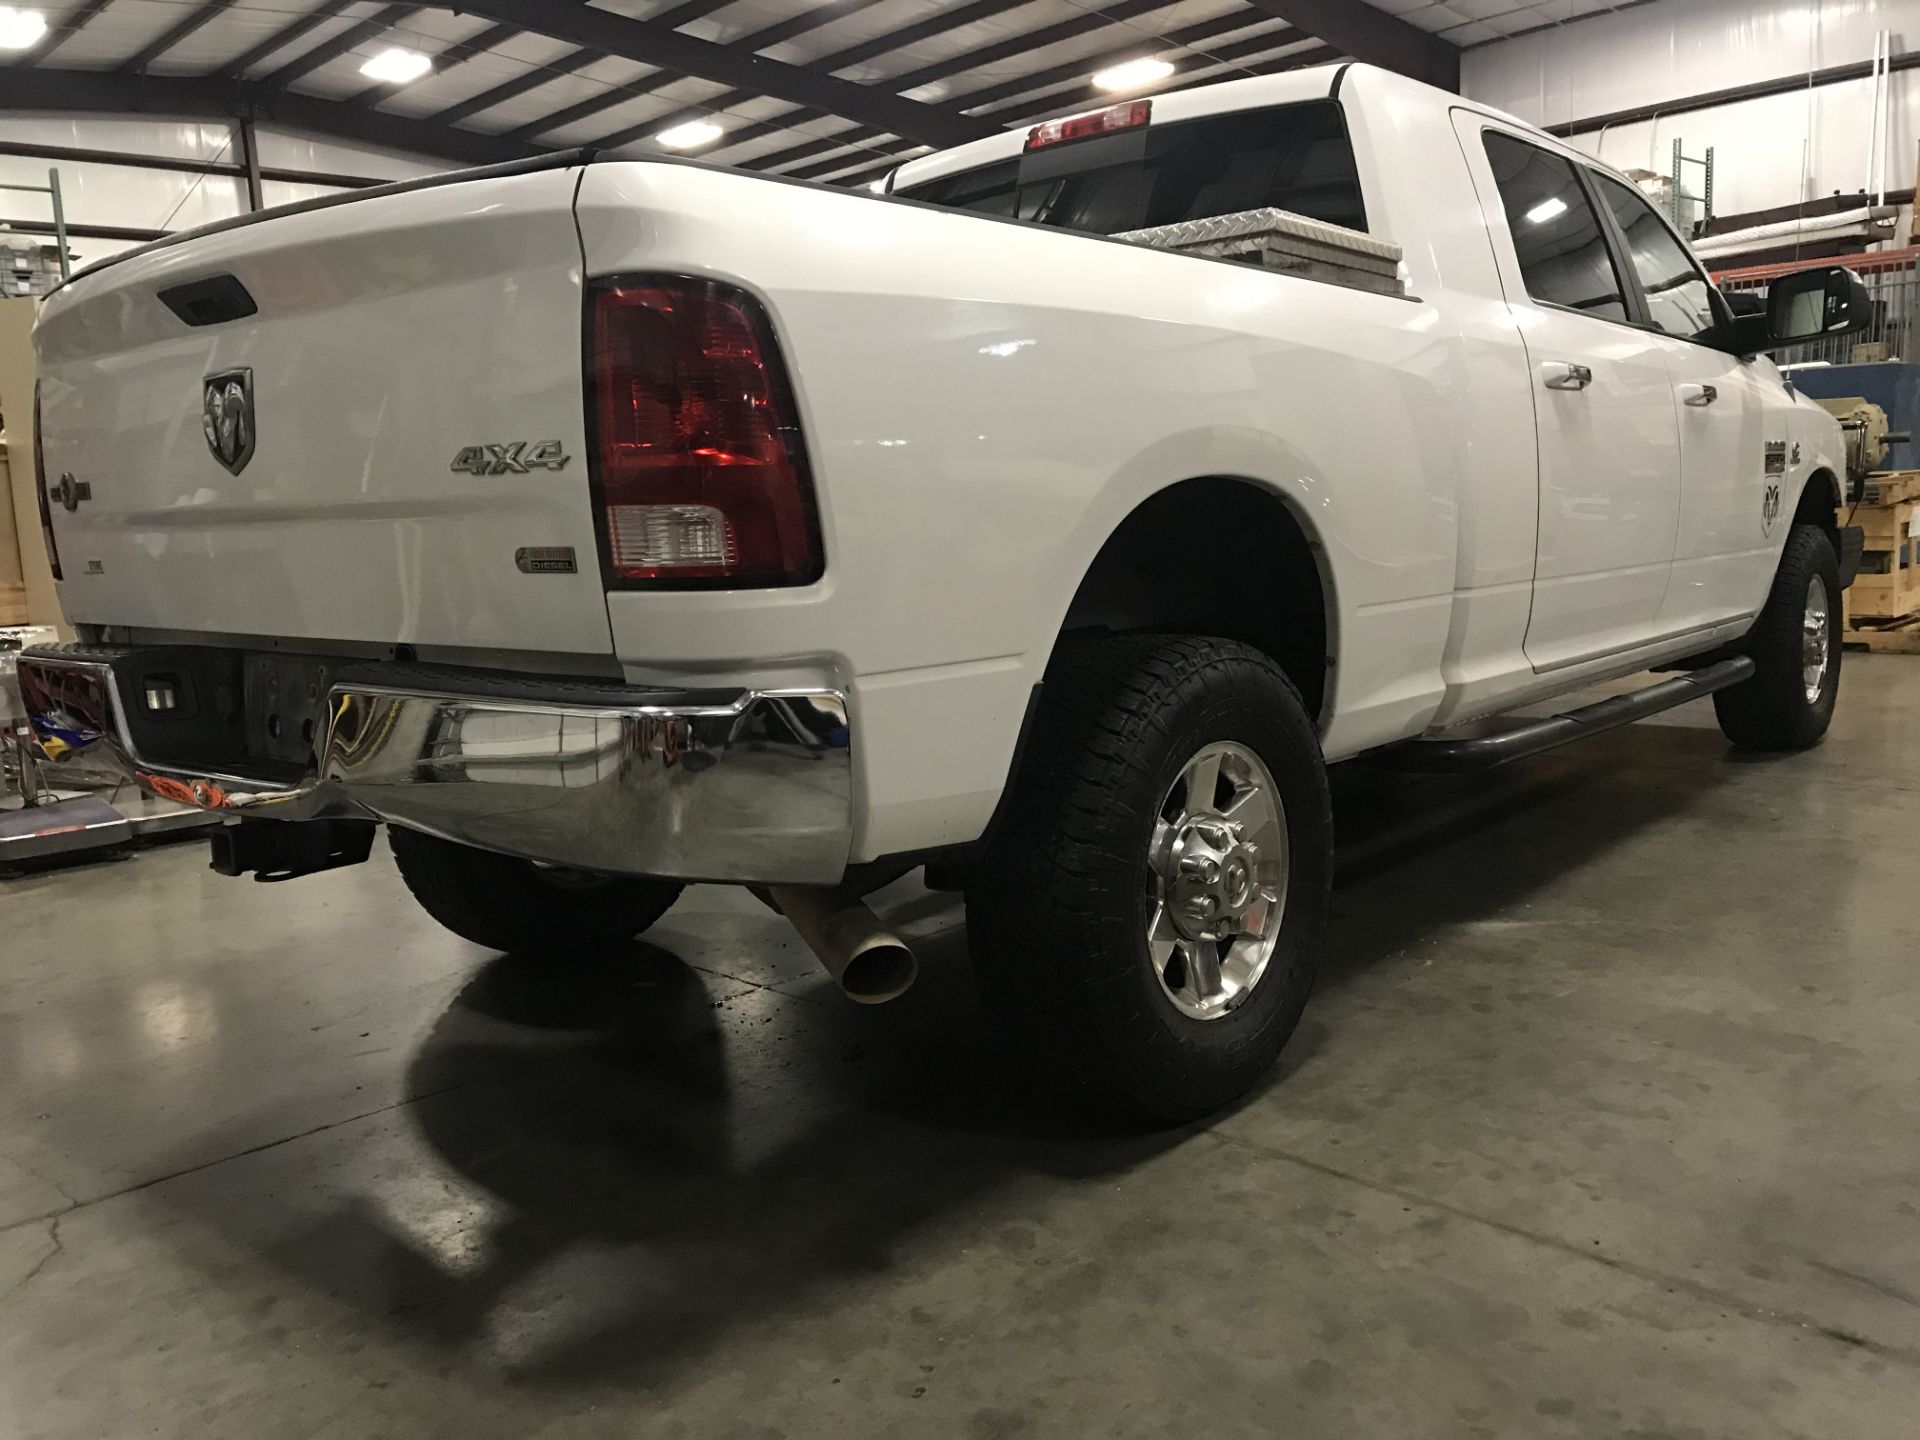 SEE VIDEO** 2012 DODGE RAM 2500 HD CREW CAB PICK UP TRUCK - Image 3 of 20